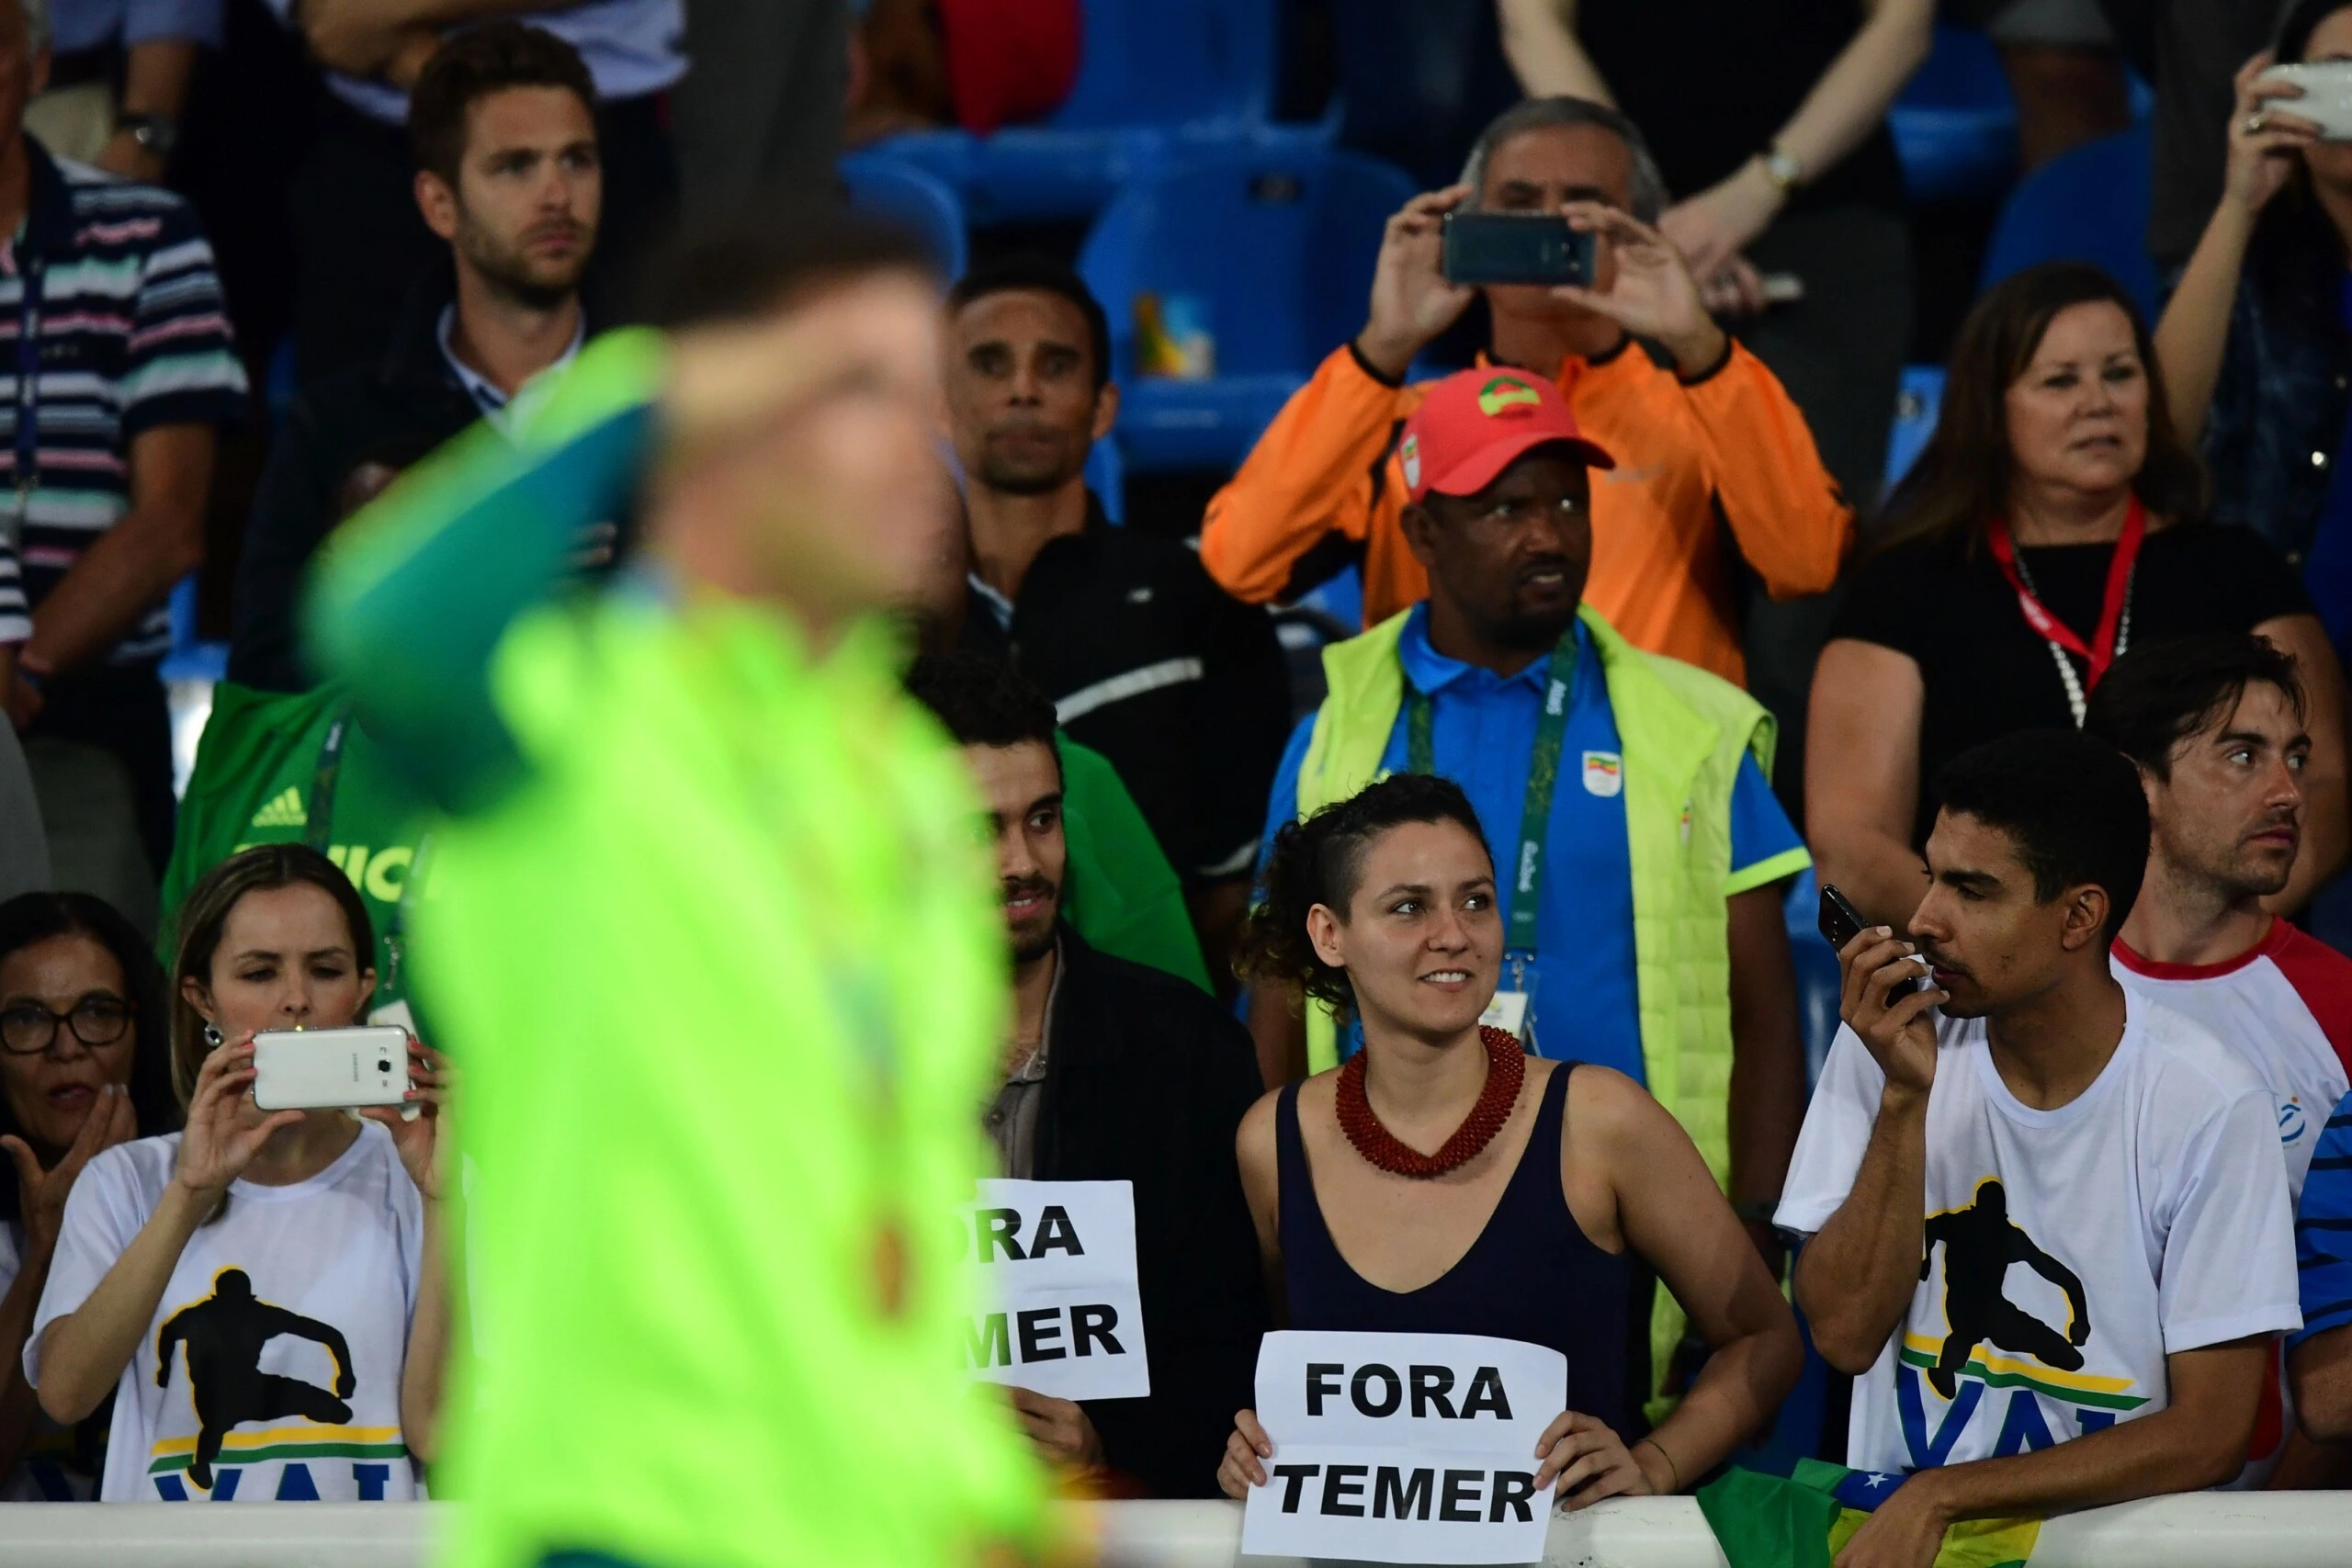 Gold medallist Brazil's Thiago Braz Da Silva (L) celebrates on the podium as people hold a banner reading "out with Temer" (Brazil's interim president Michel Temer) at the medal ceremony for the men's pole vault during the athletics event at the Rio 2016 Olympic Games at the Olympic Stadium in Rio de Janeiro on August 16, 2016. / AFP / FRANCK FIFE        (Photo credit should read FRANCK FIFE/AFP/Getty Images)